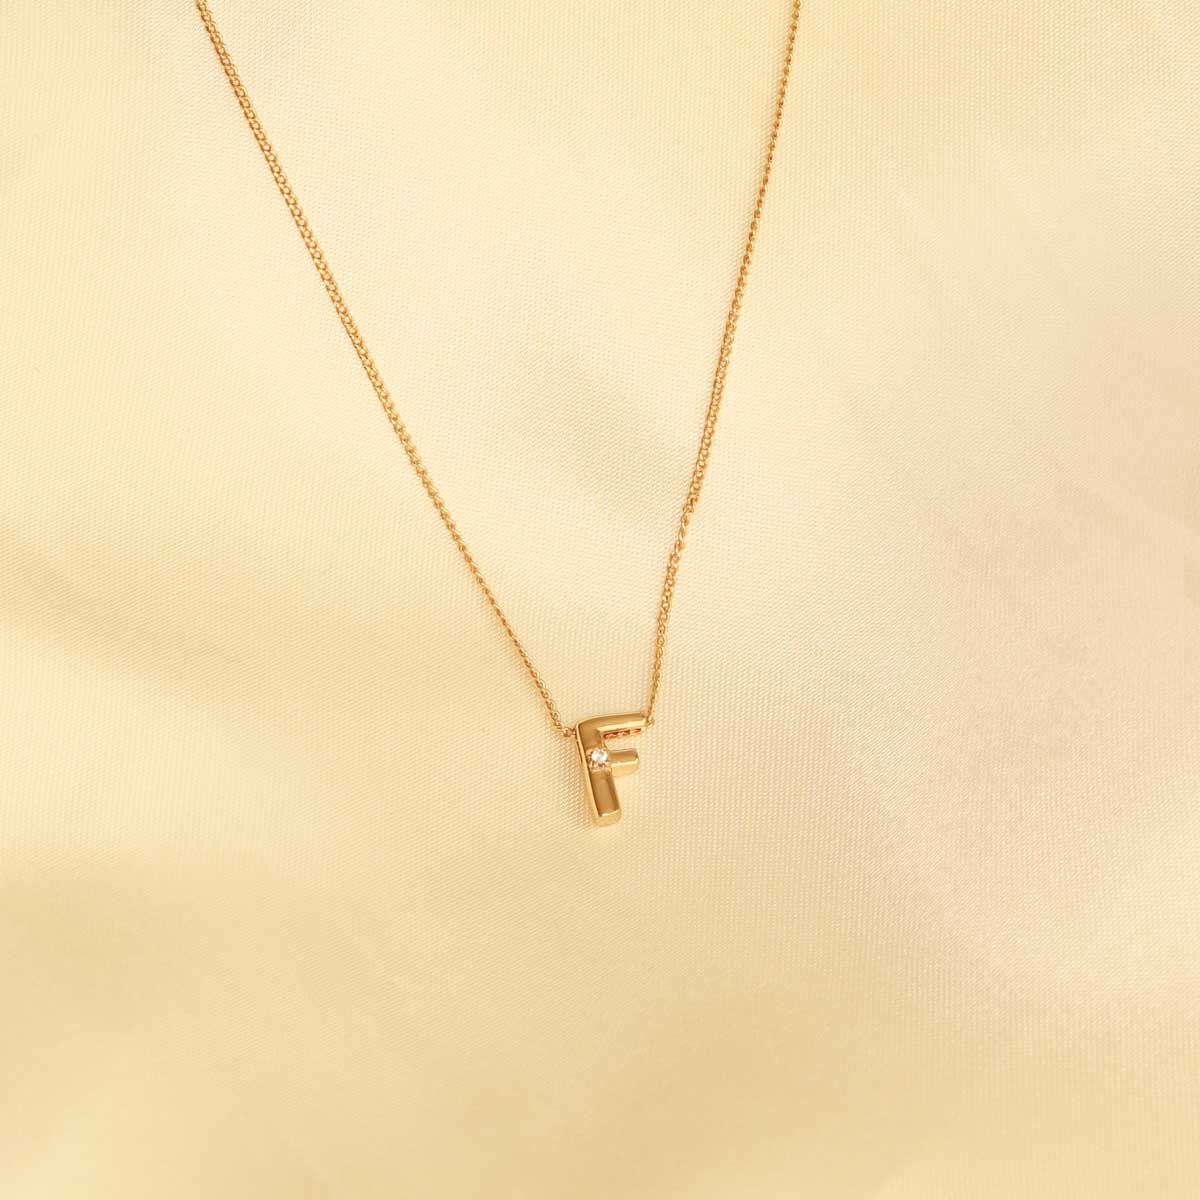 Flat lay shot of F Initial Pendant Necklace in Gold